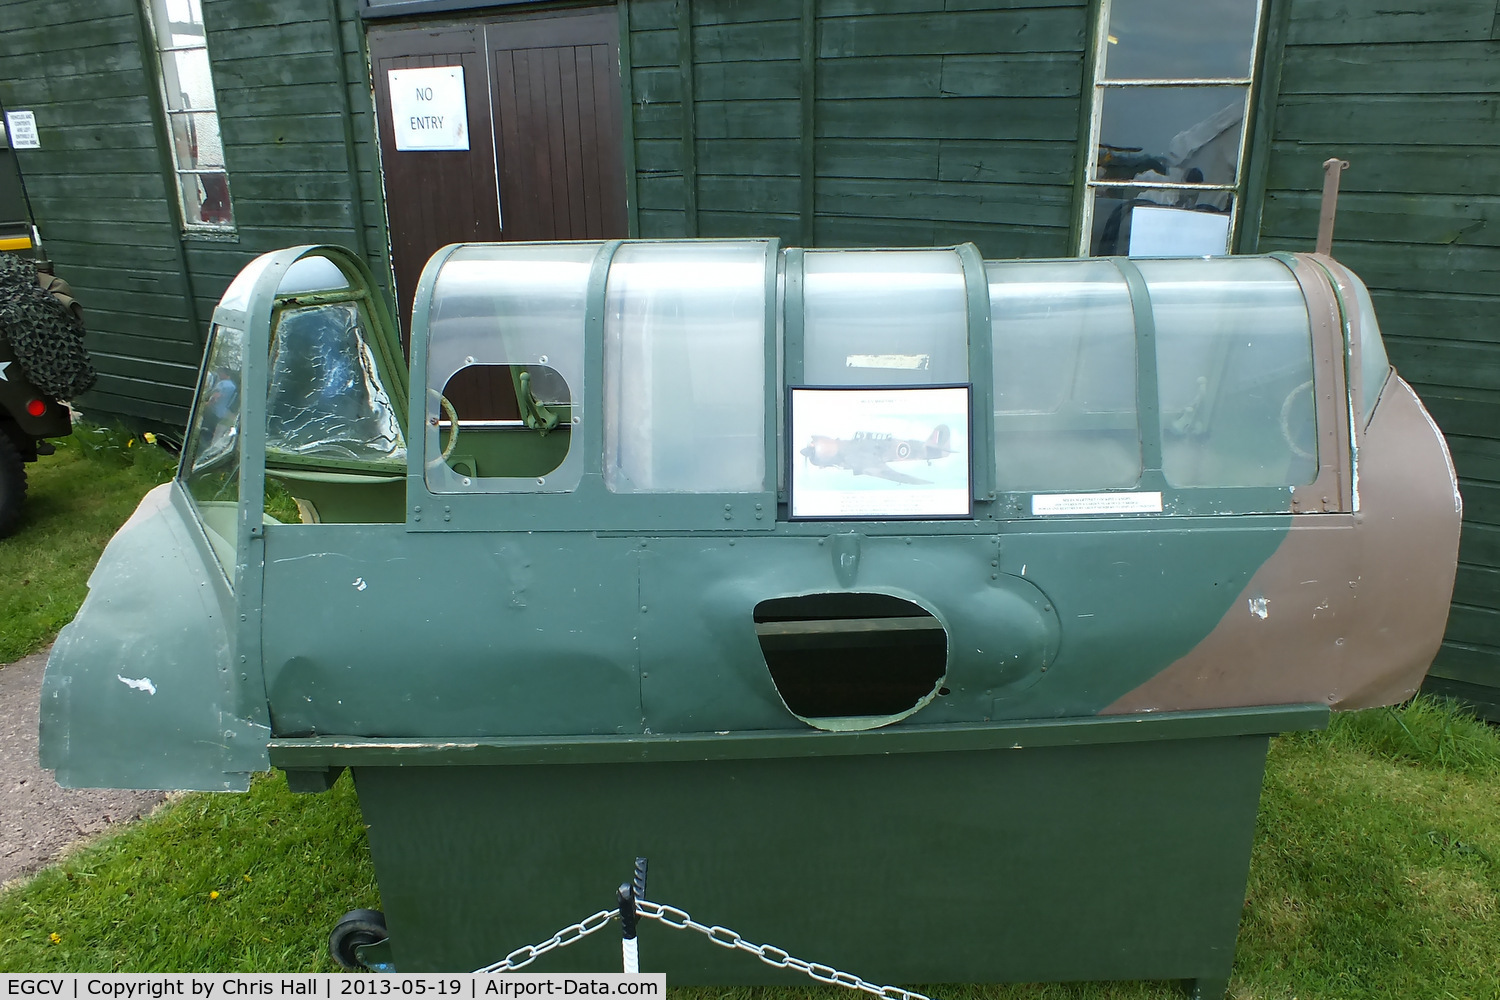 Sleap Airfield Airport, Shrewsbury, England United Kingdom (EGCV) - Miles M.25 Martinet canopy at the Wartime Aircraft Recovery Group, Sleap